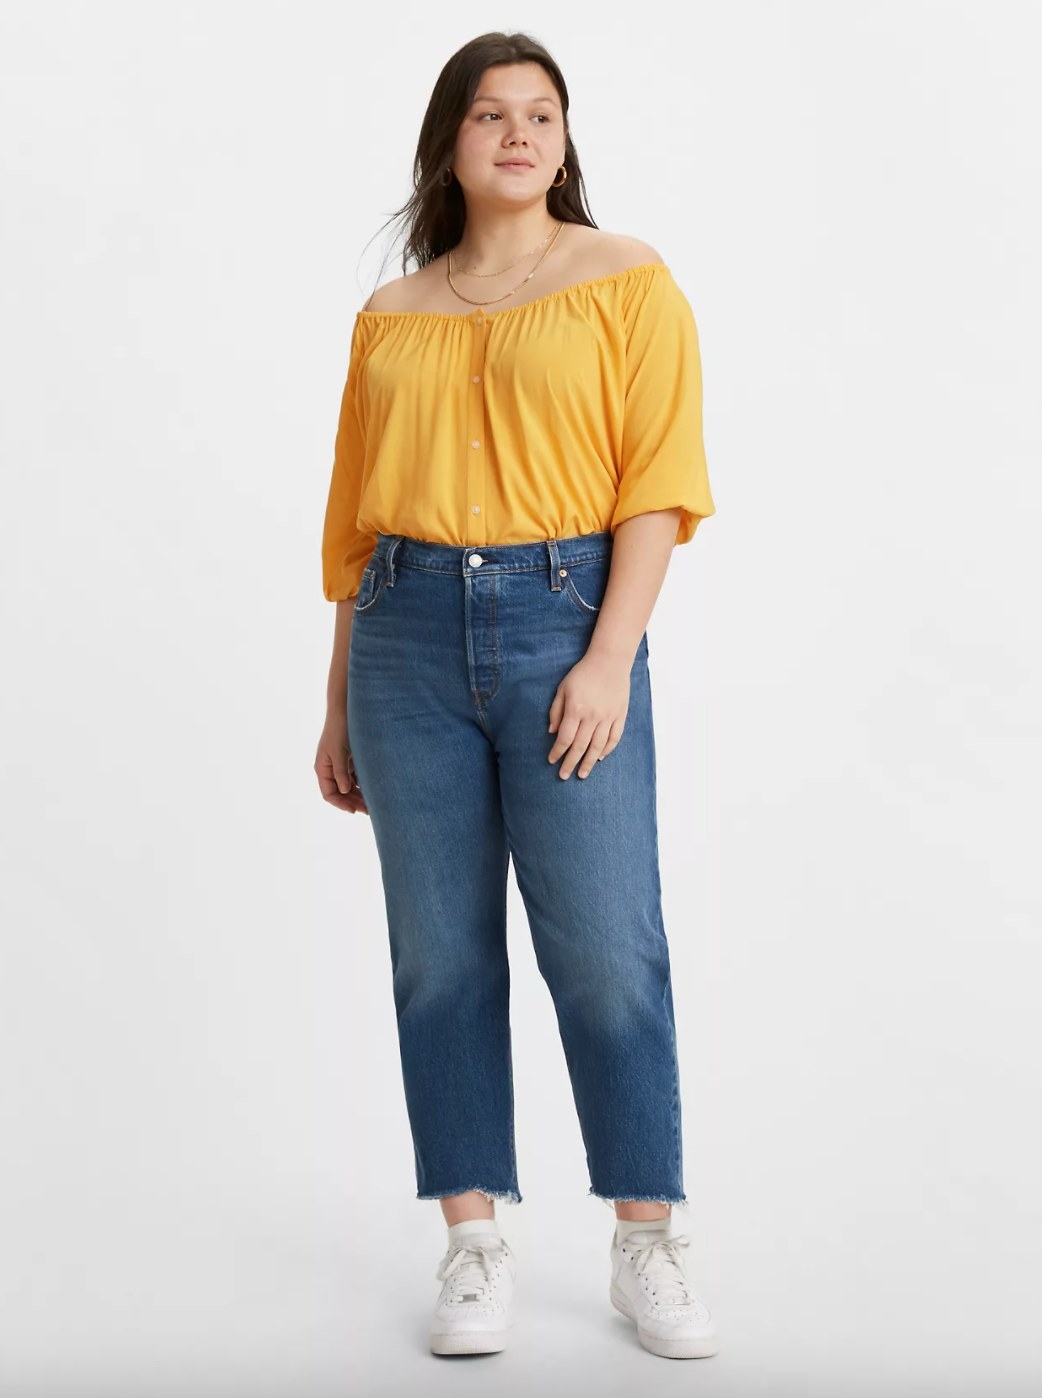 The 501 cropped jeans